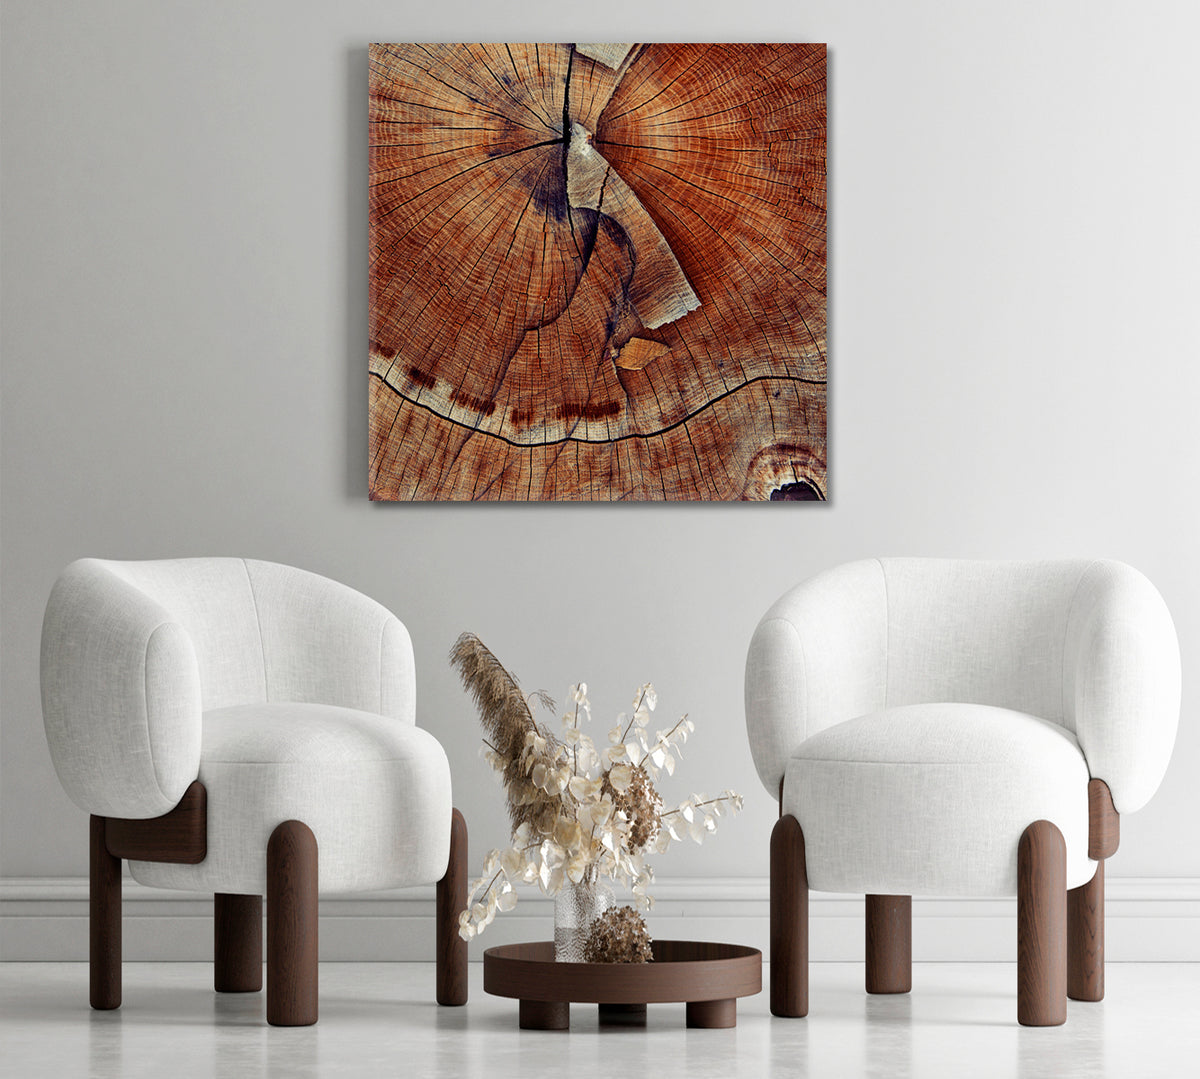 ABSTRACT WOOD Poster Abstract Art Print Artesty 1 Panel 12"x12" 